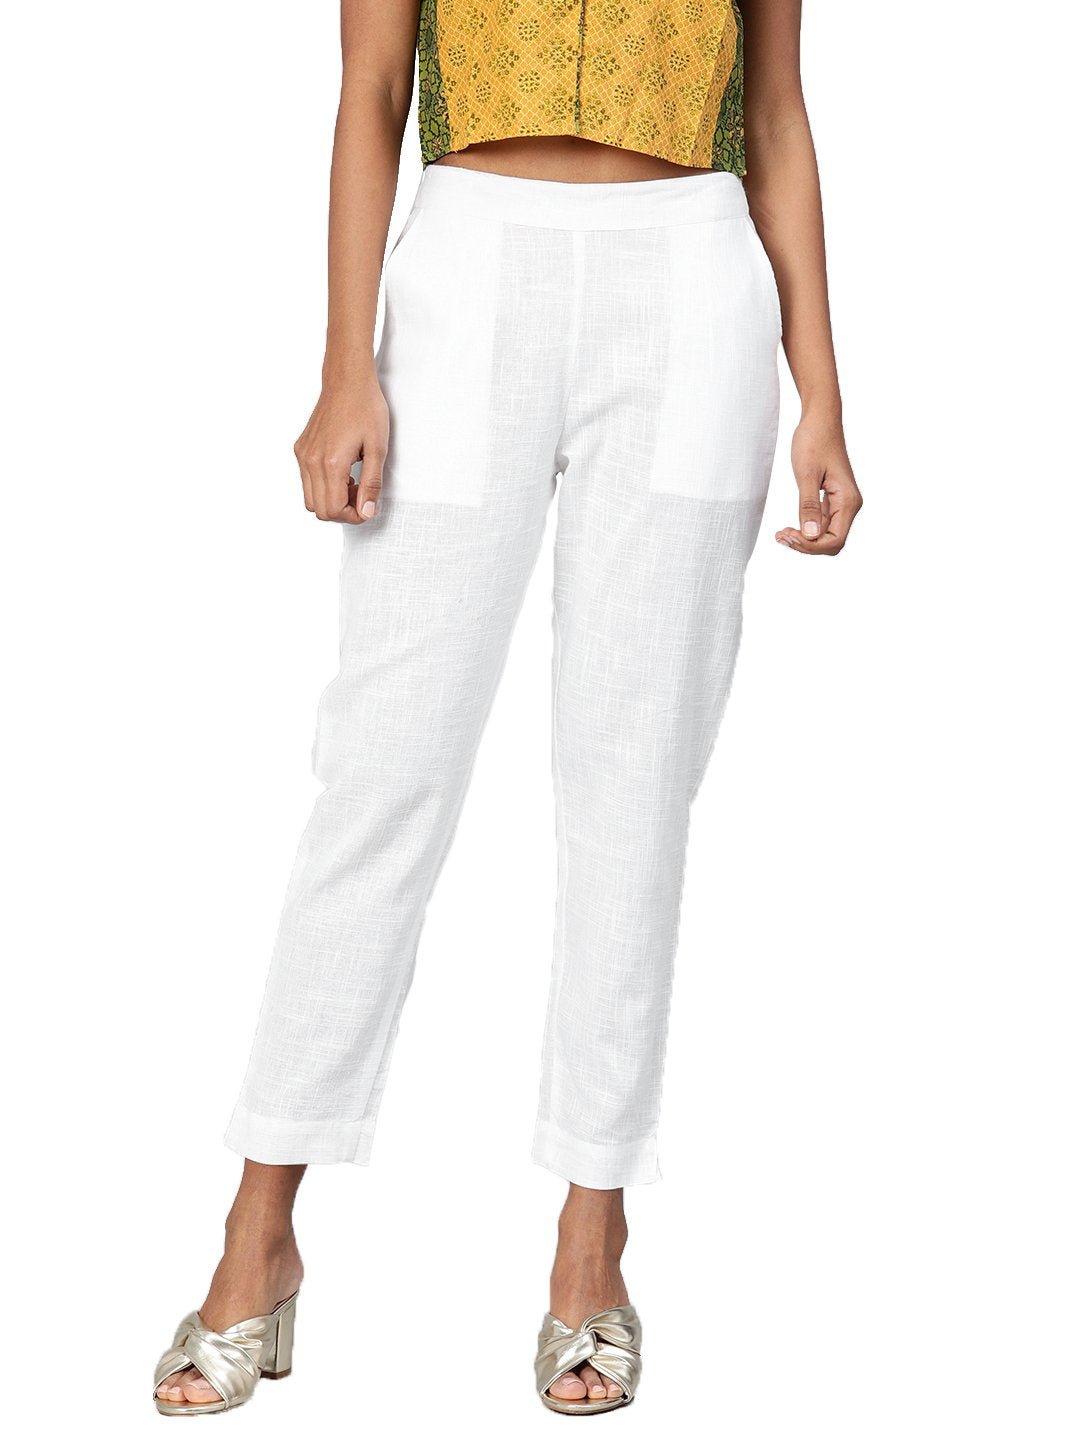 white-casual-trouser-10005015WH, Women Indian Ethnic Clothing, Cotton Pant